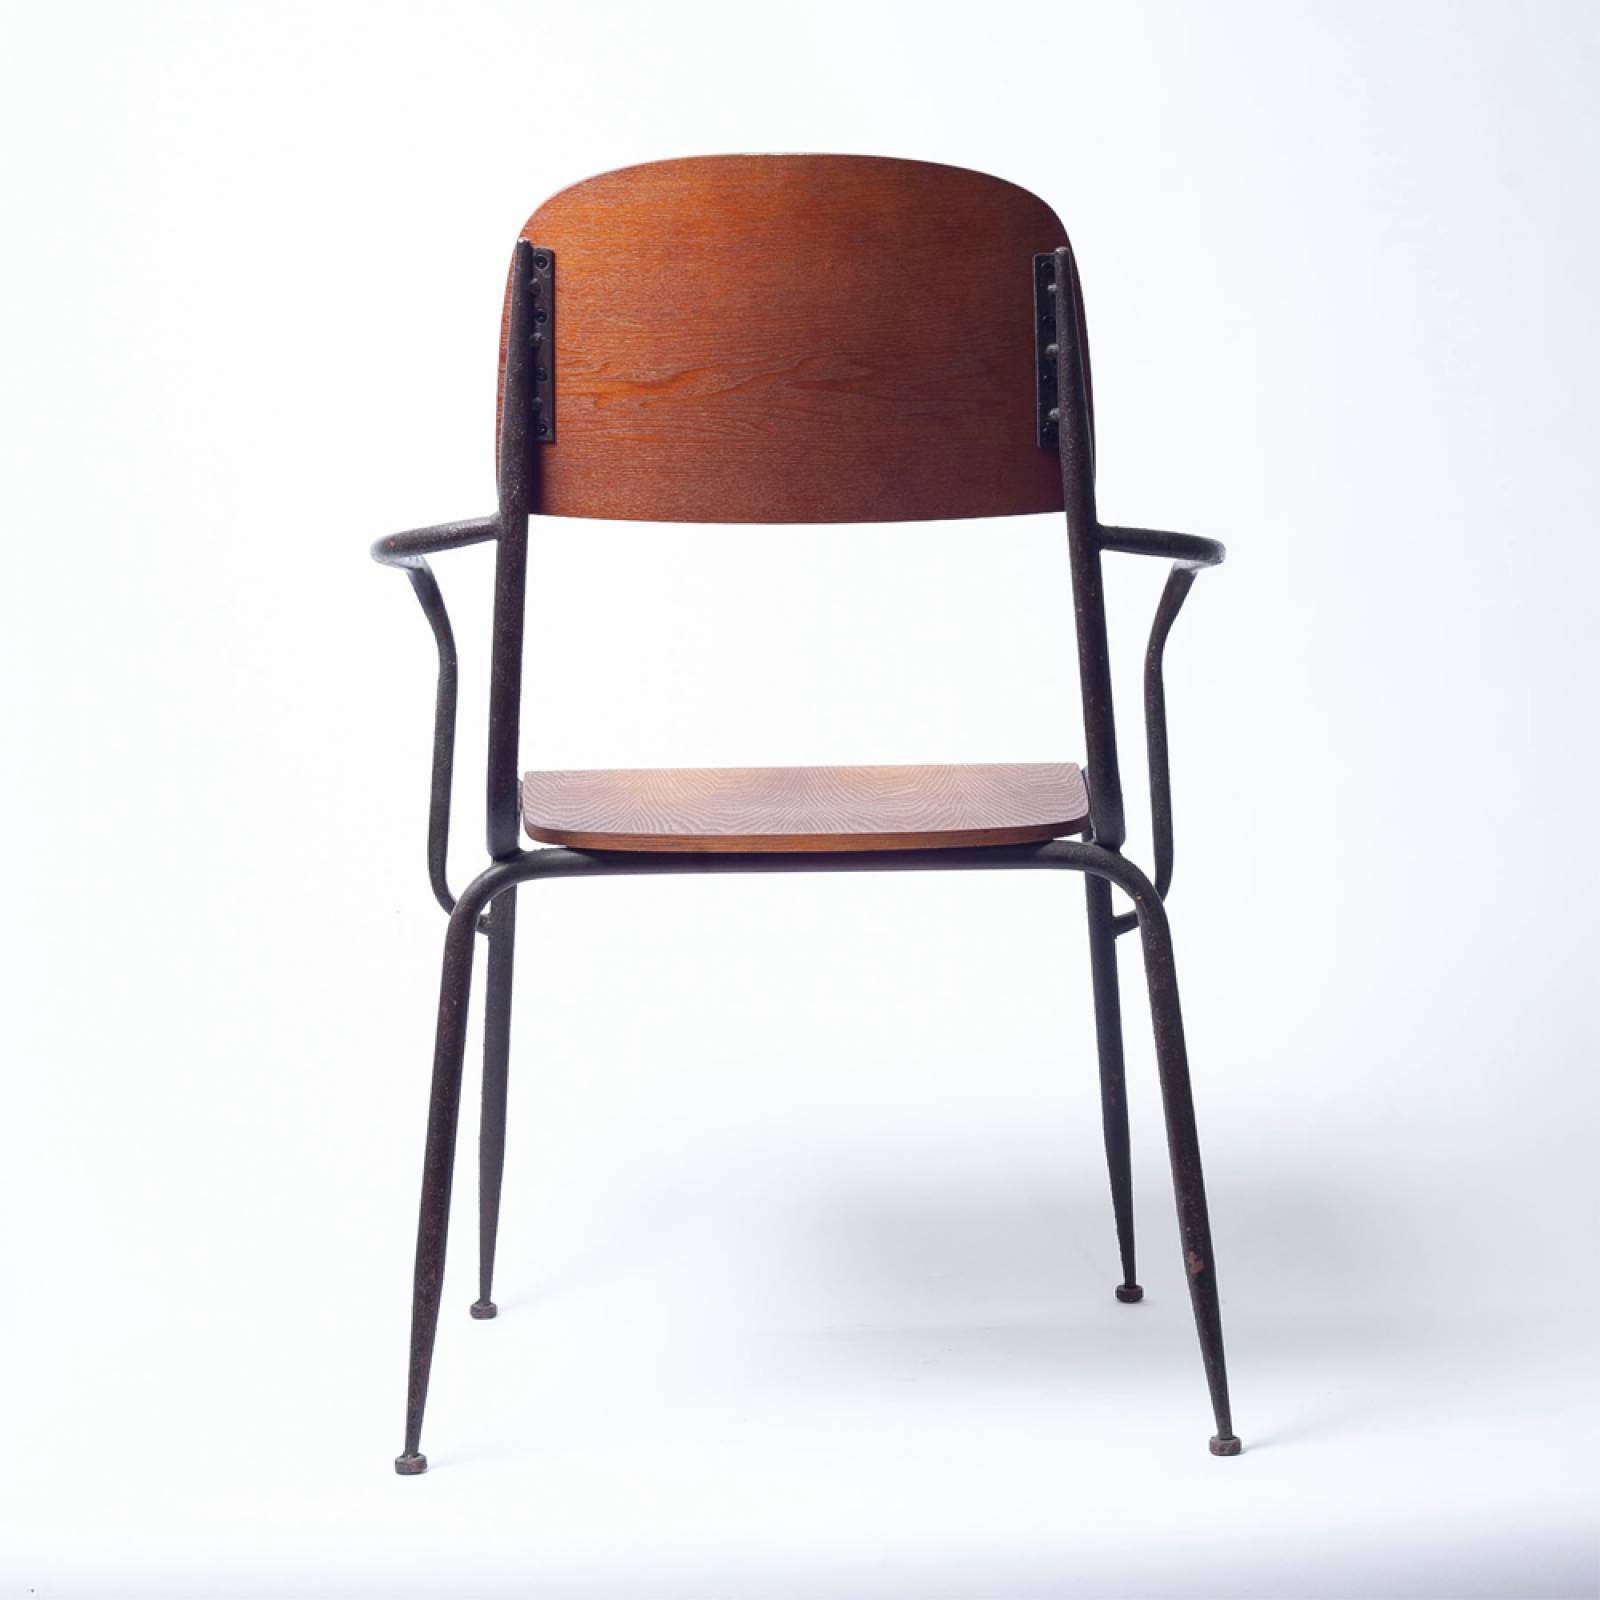 Industrial Faculty Chair With Metal Frame & Wooden Seat thumbnails